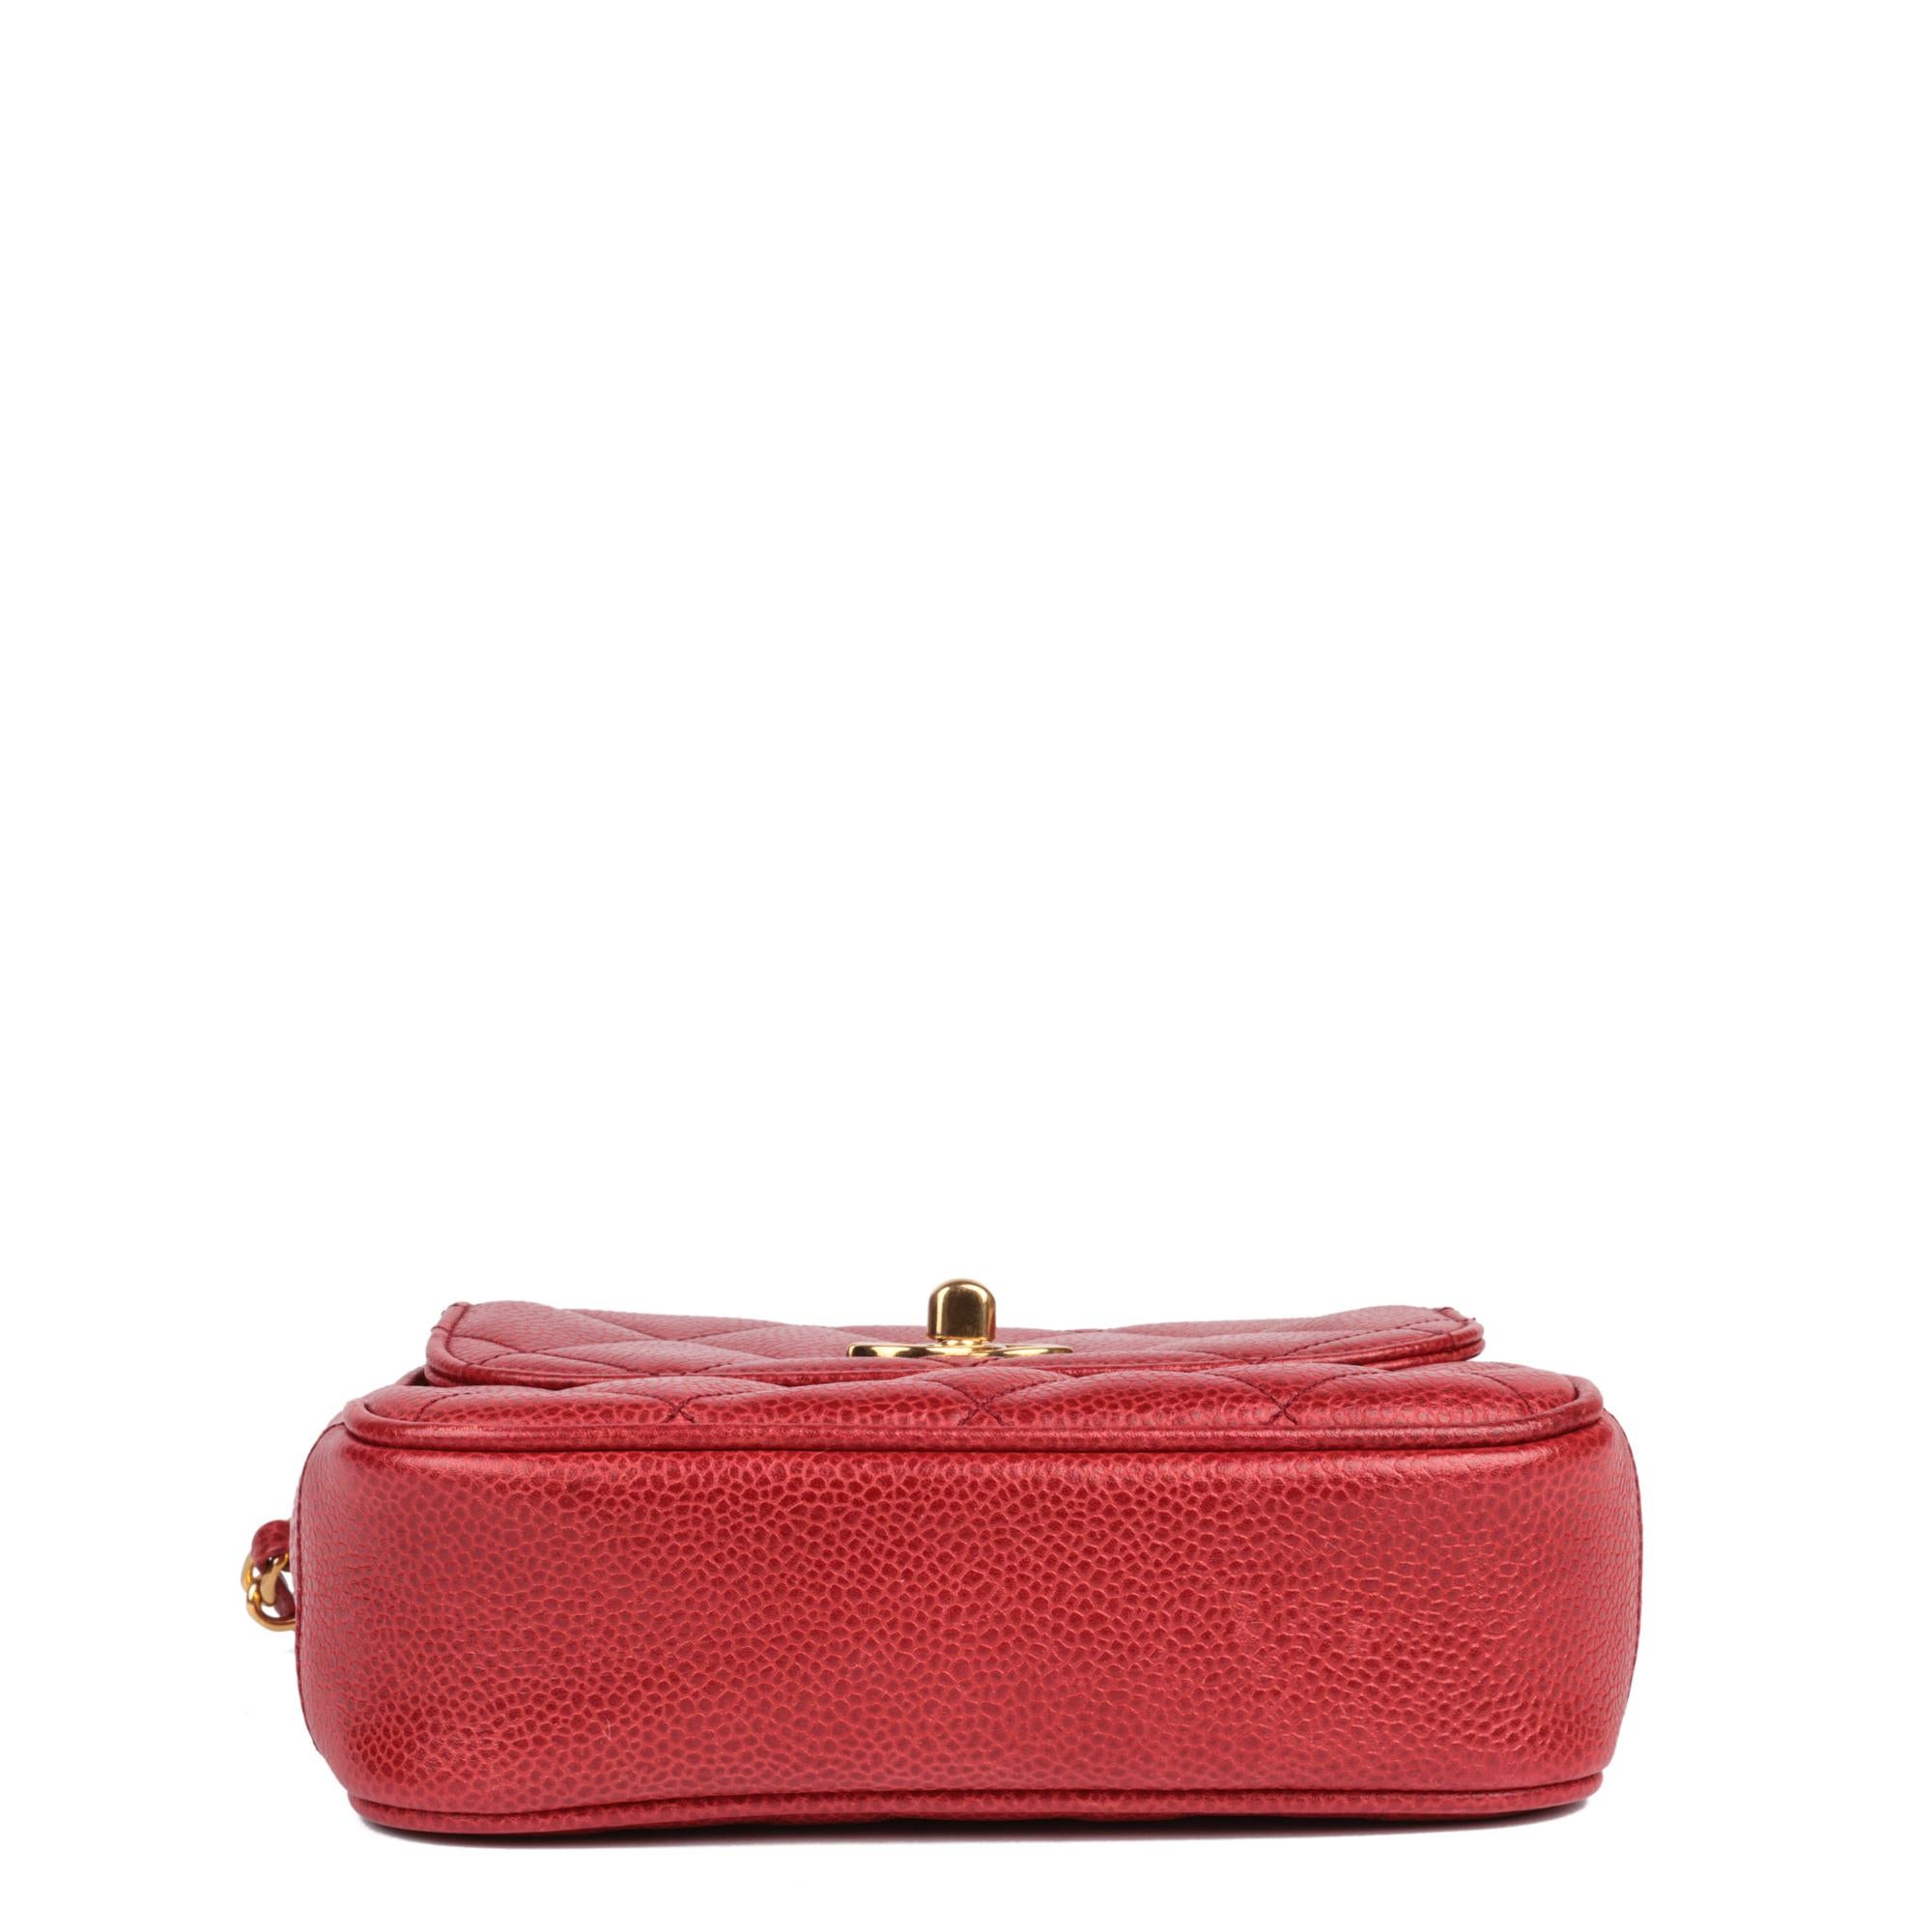 CHANEL Red Quilted Caviar Leather Vintage Mini Flap Bag For Sale 2